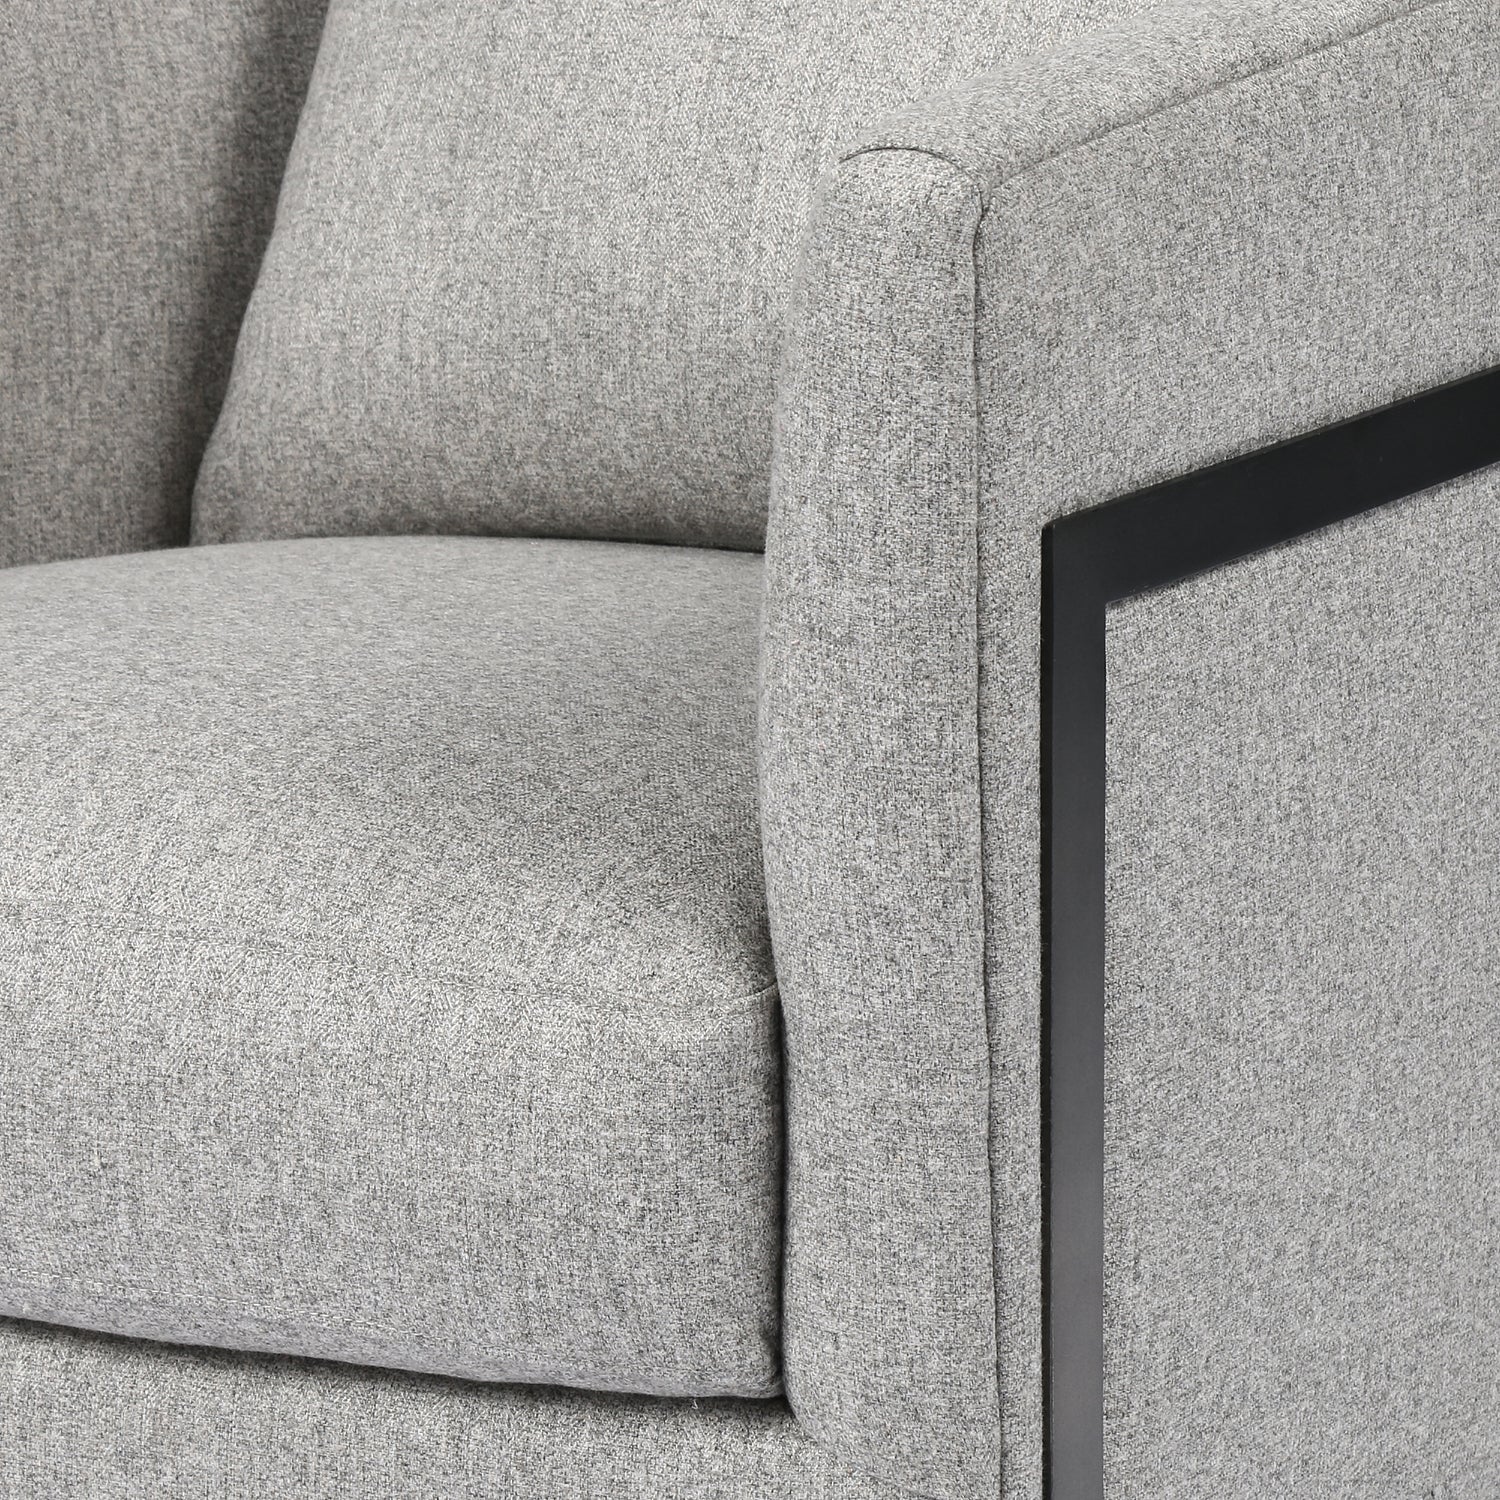 Orly Natural Fabric with Carbon Black Stainless Steel | Brighton Chair | Valley Ridge Furniture